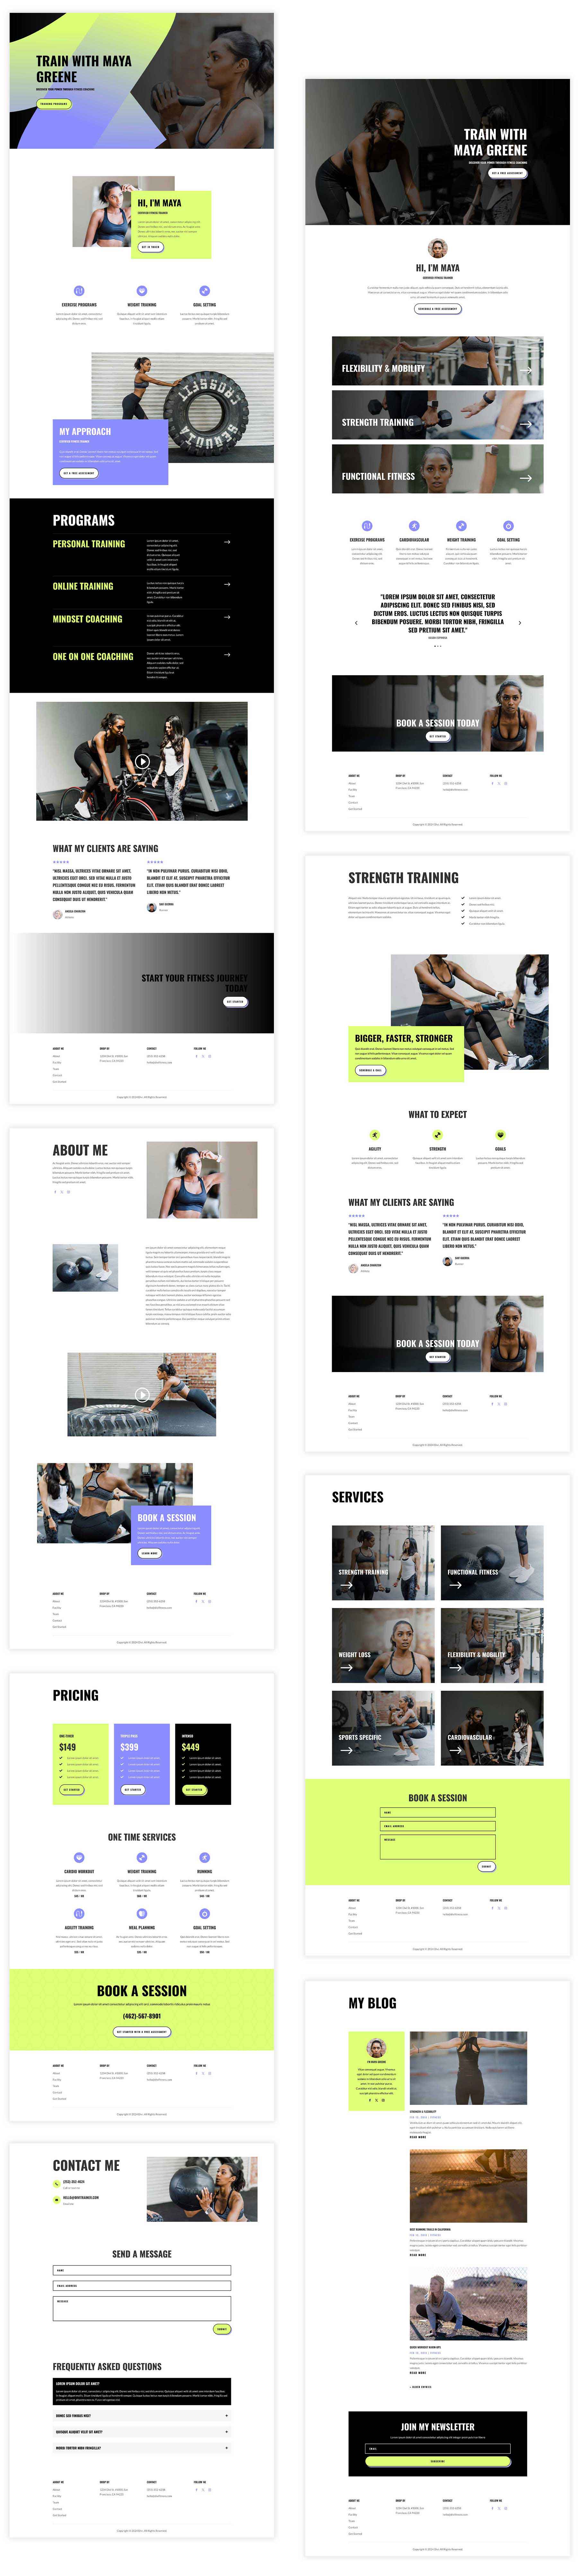 Fitness Trainer layout pack